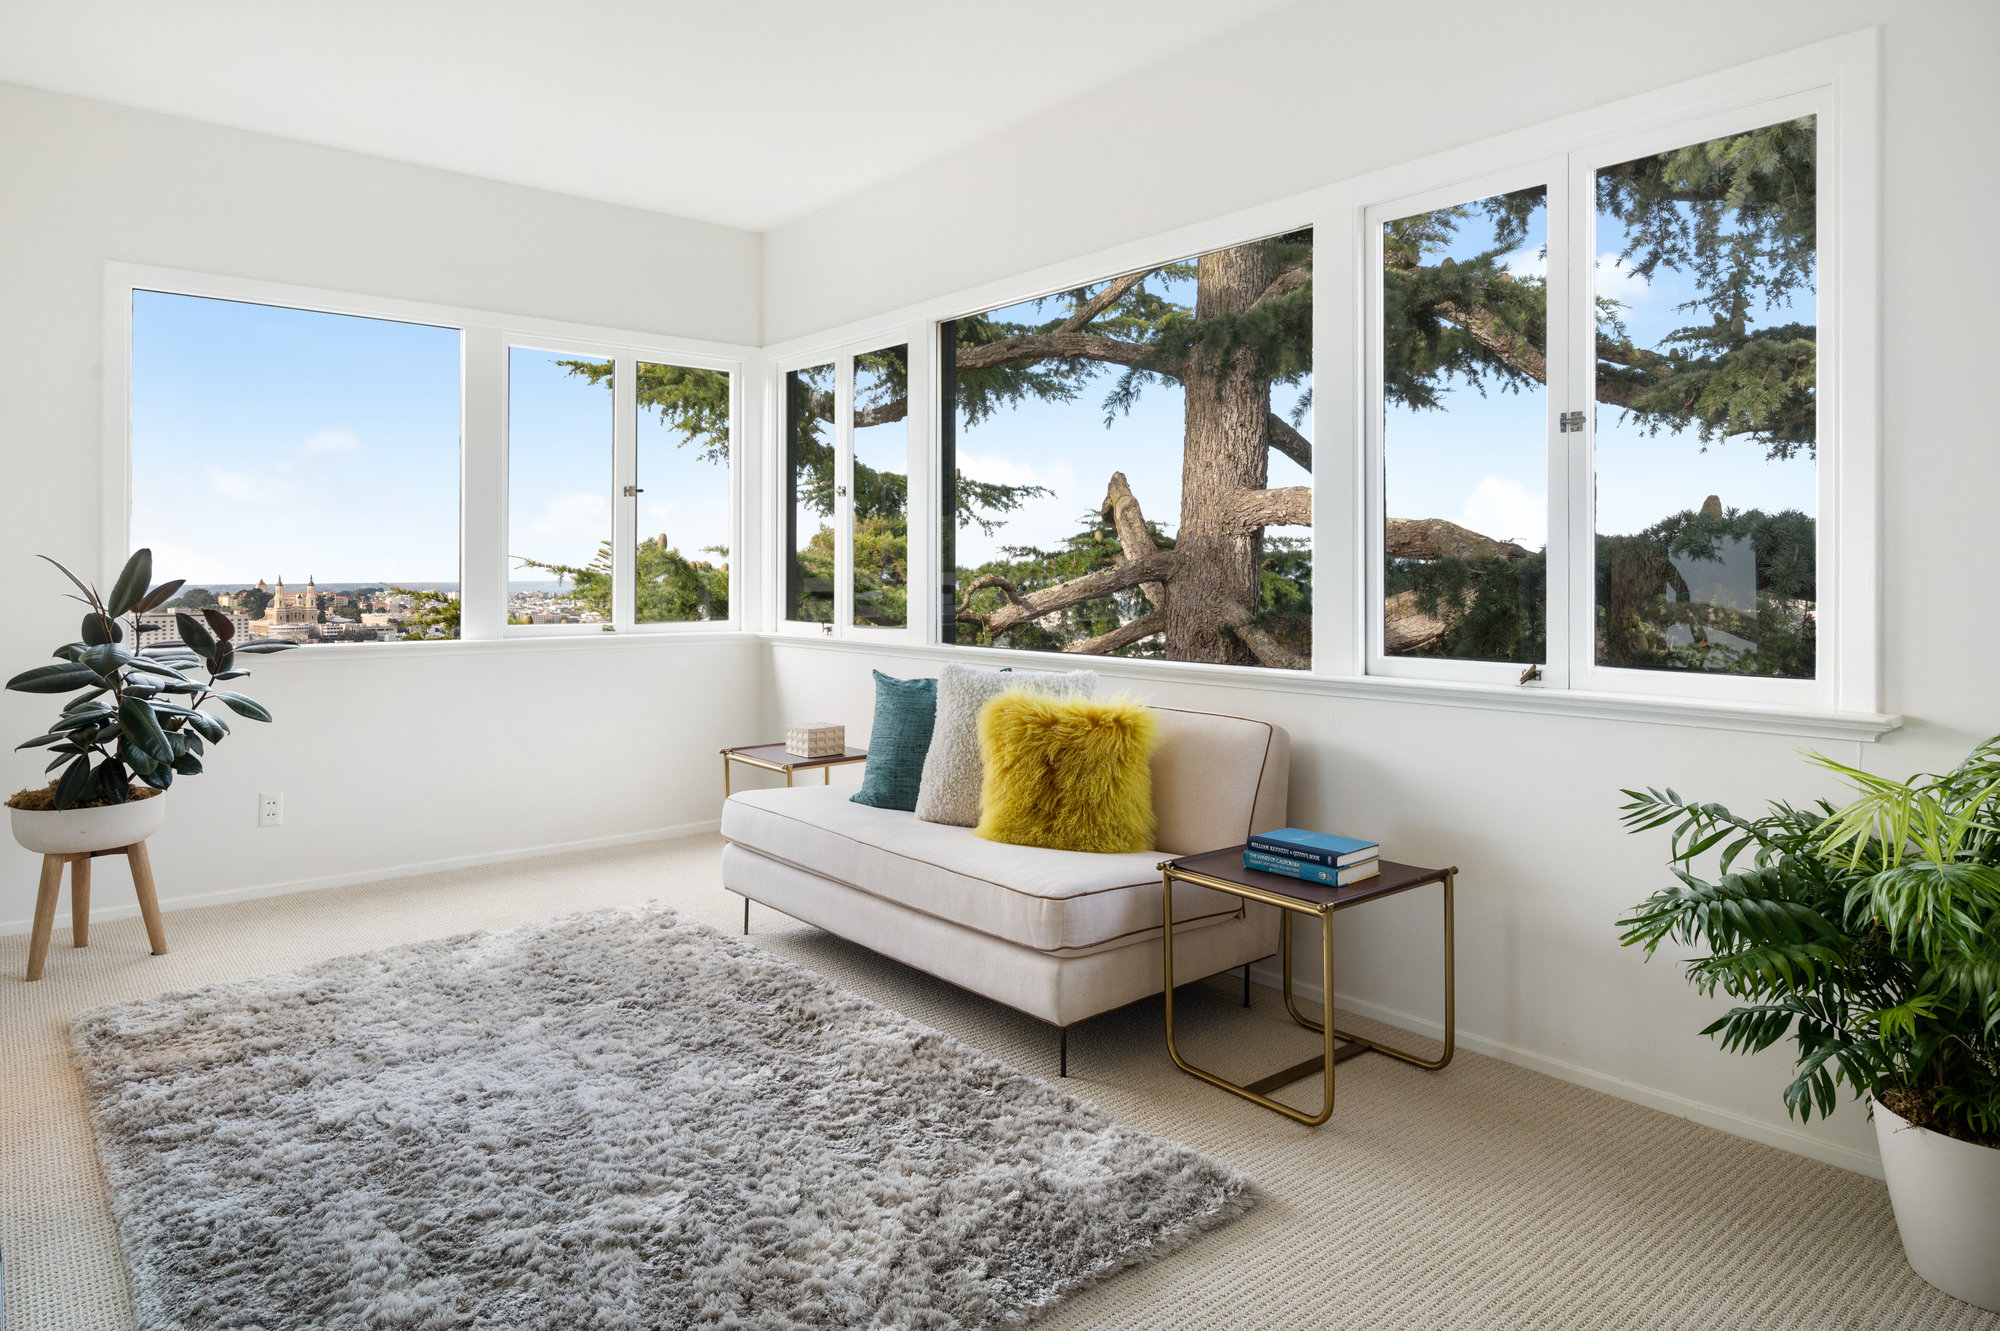 Property Photo: View of the primary sitting area with views of trees and the city beyond